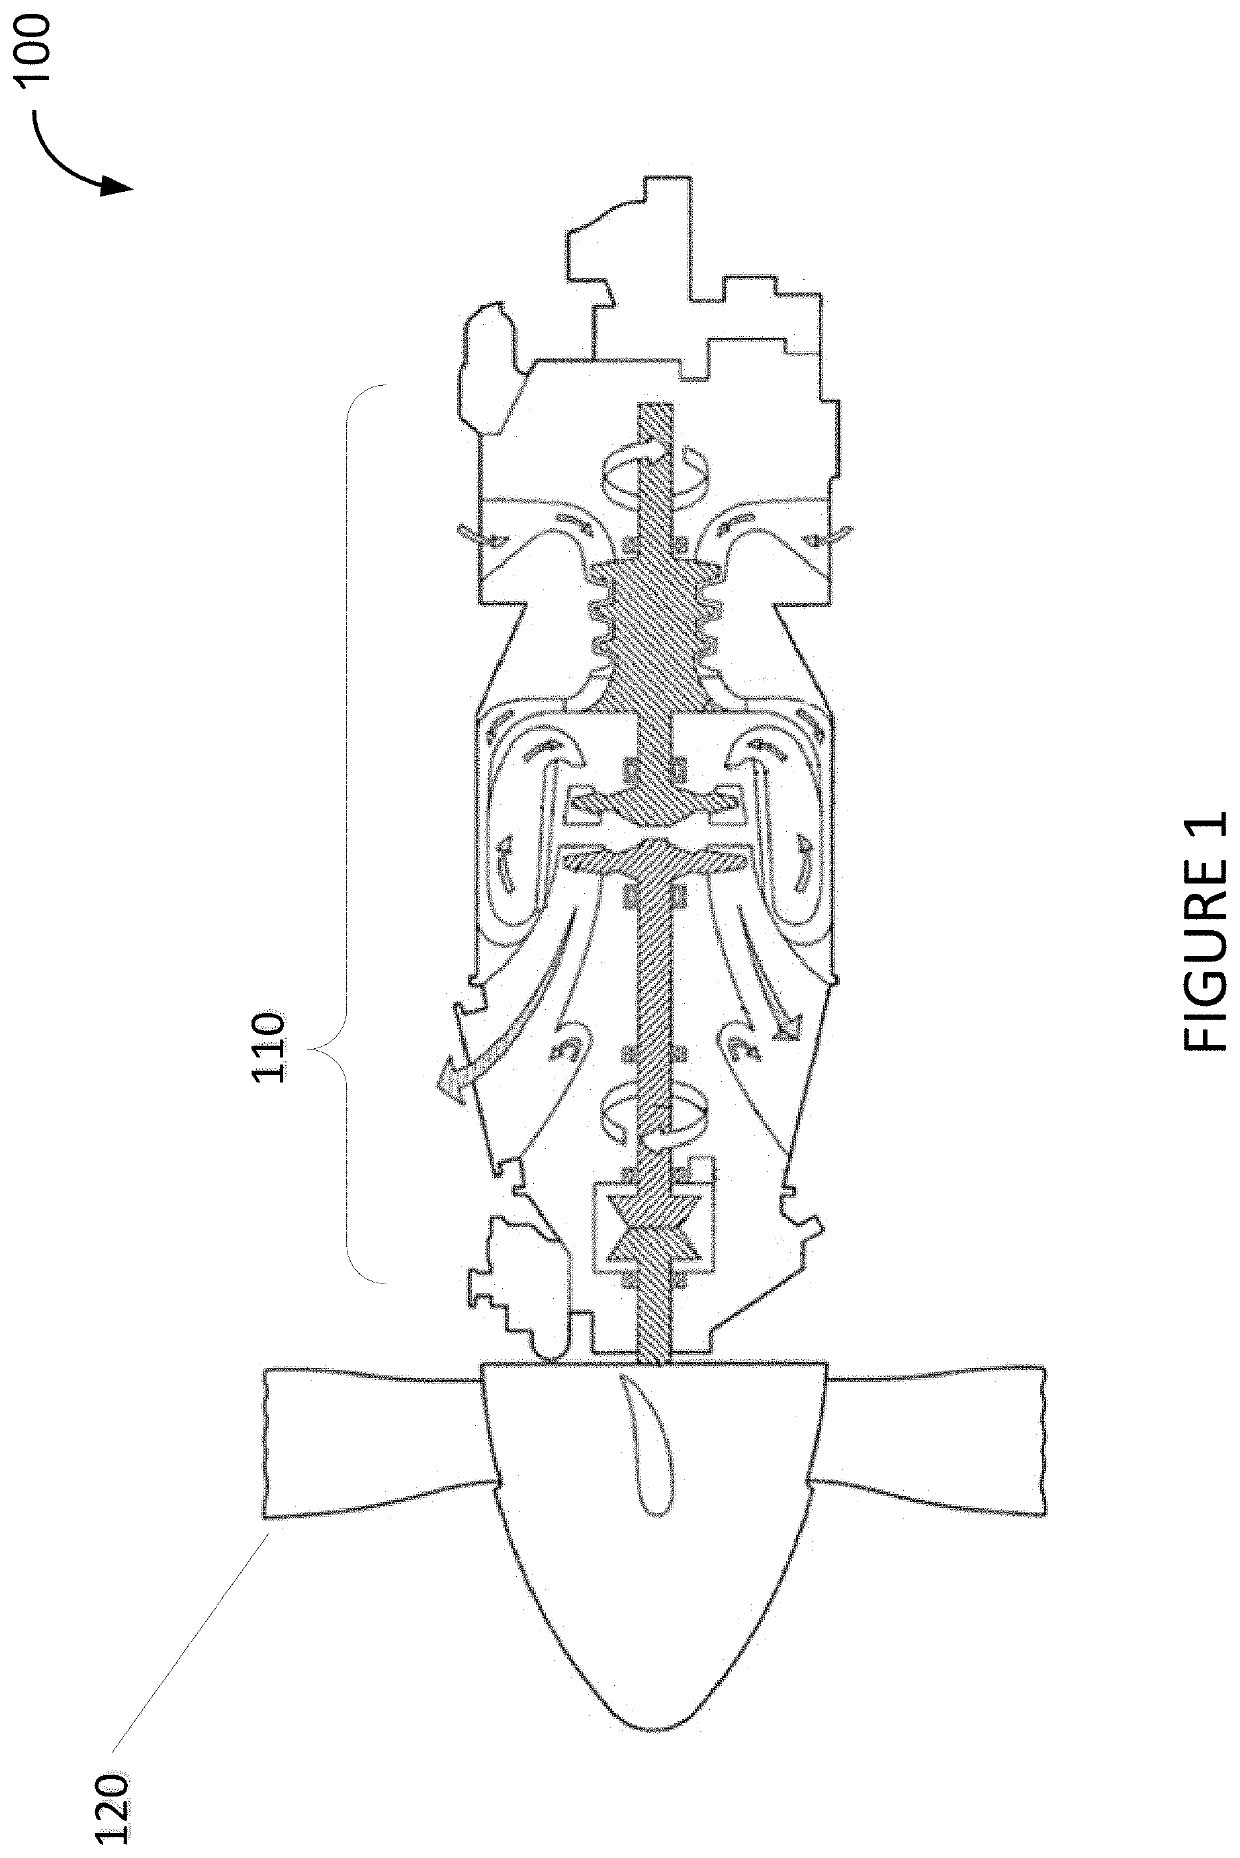 Autothrottle control for turboprop engines